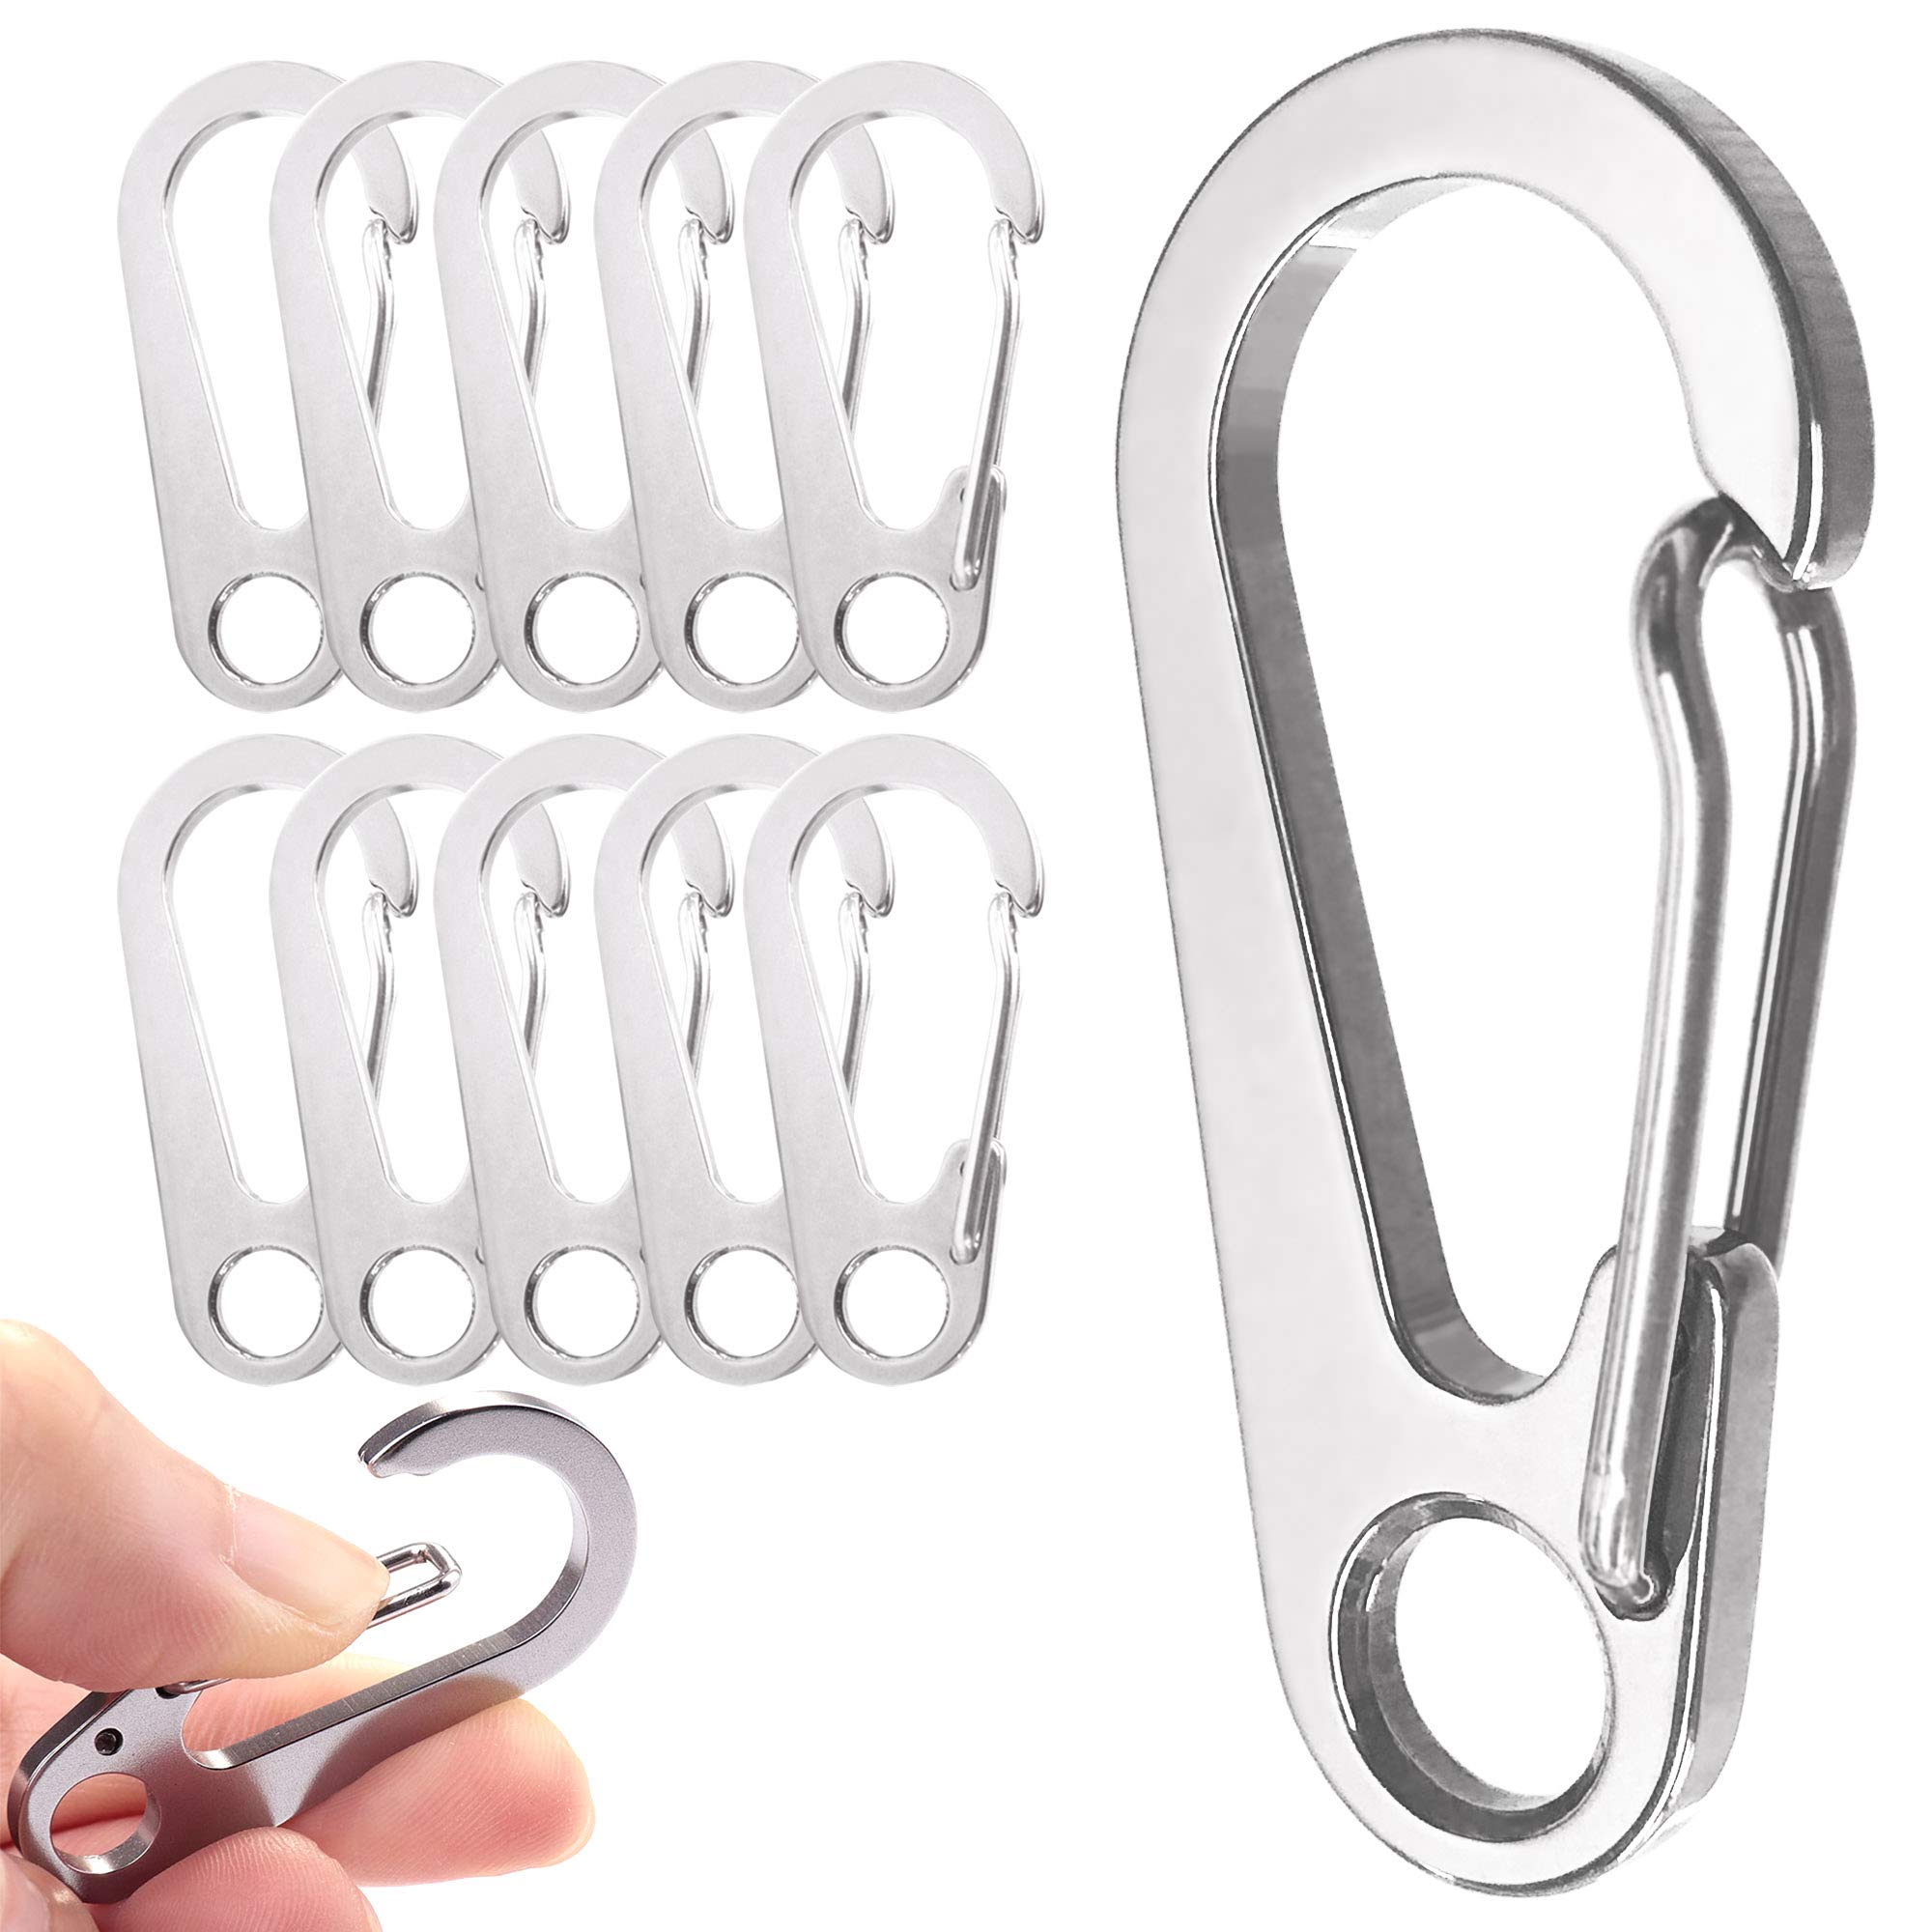 10PCS 1.77 Inch Stainless Steel Clip Spring-Snap Hook,EDC Mini Carabiner  Custom Quick Release Hook